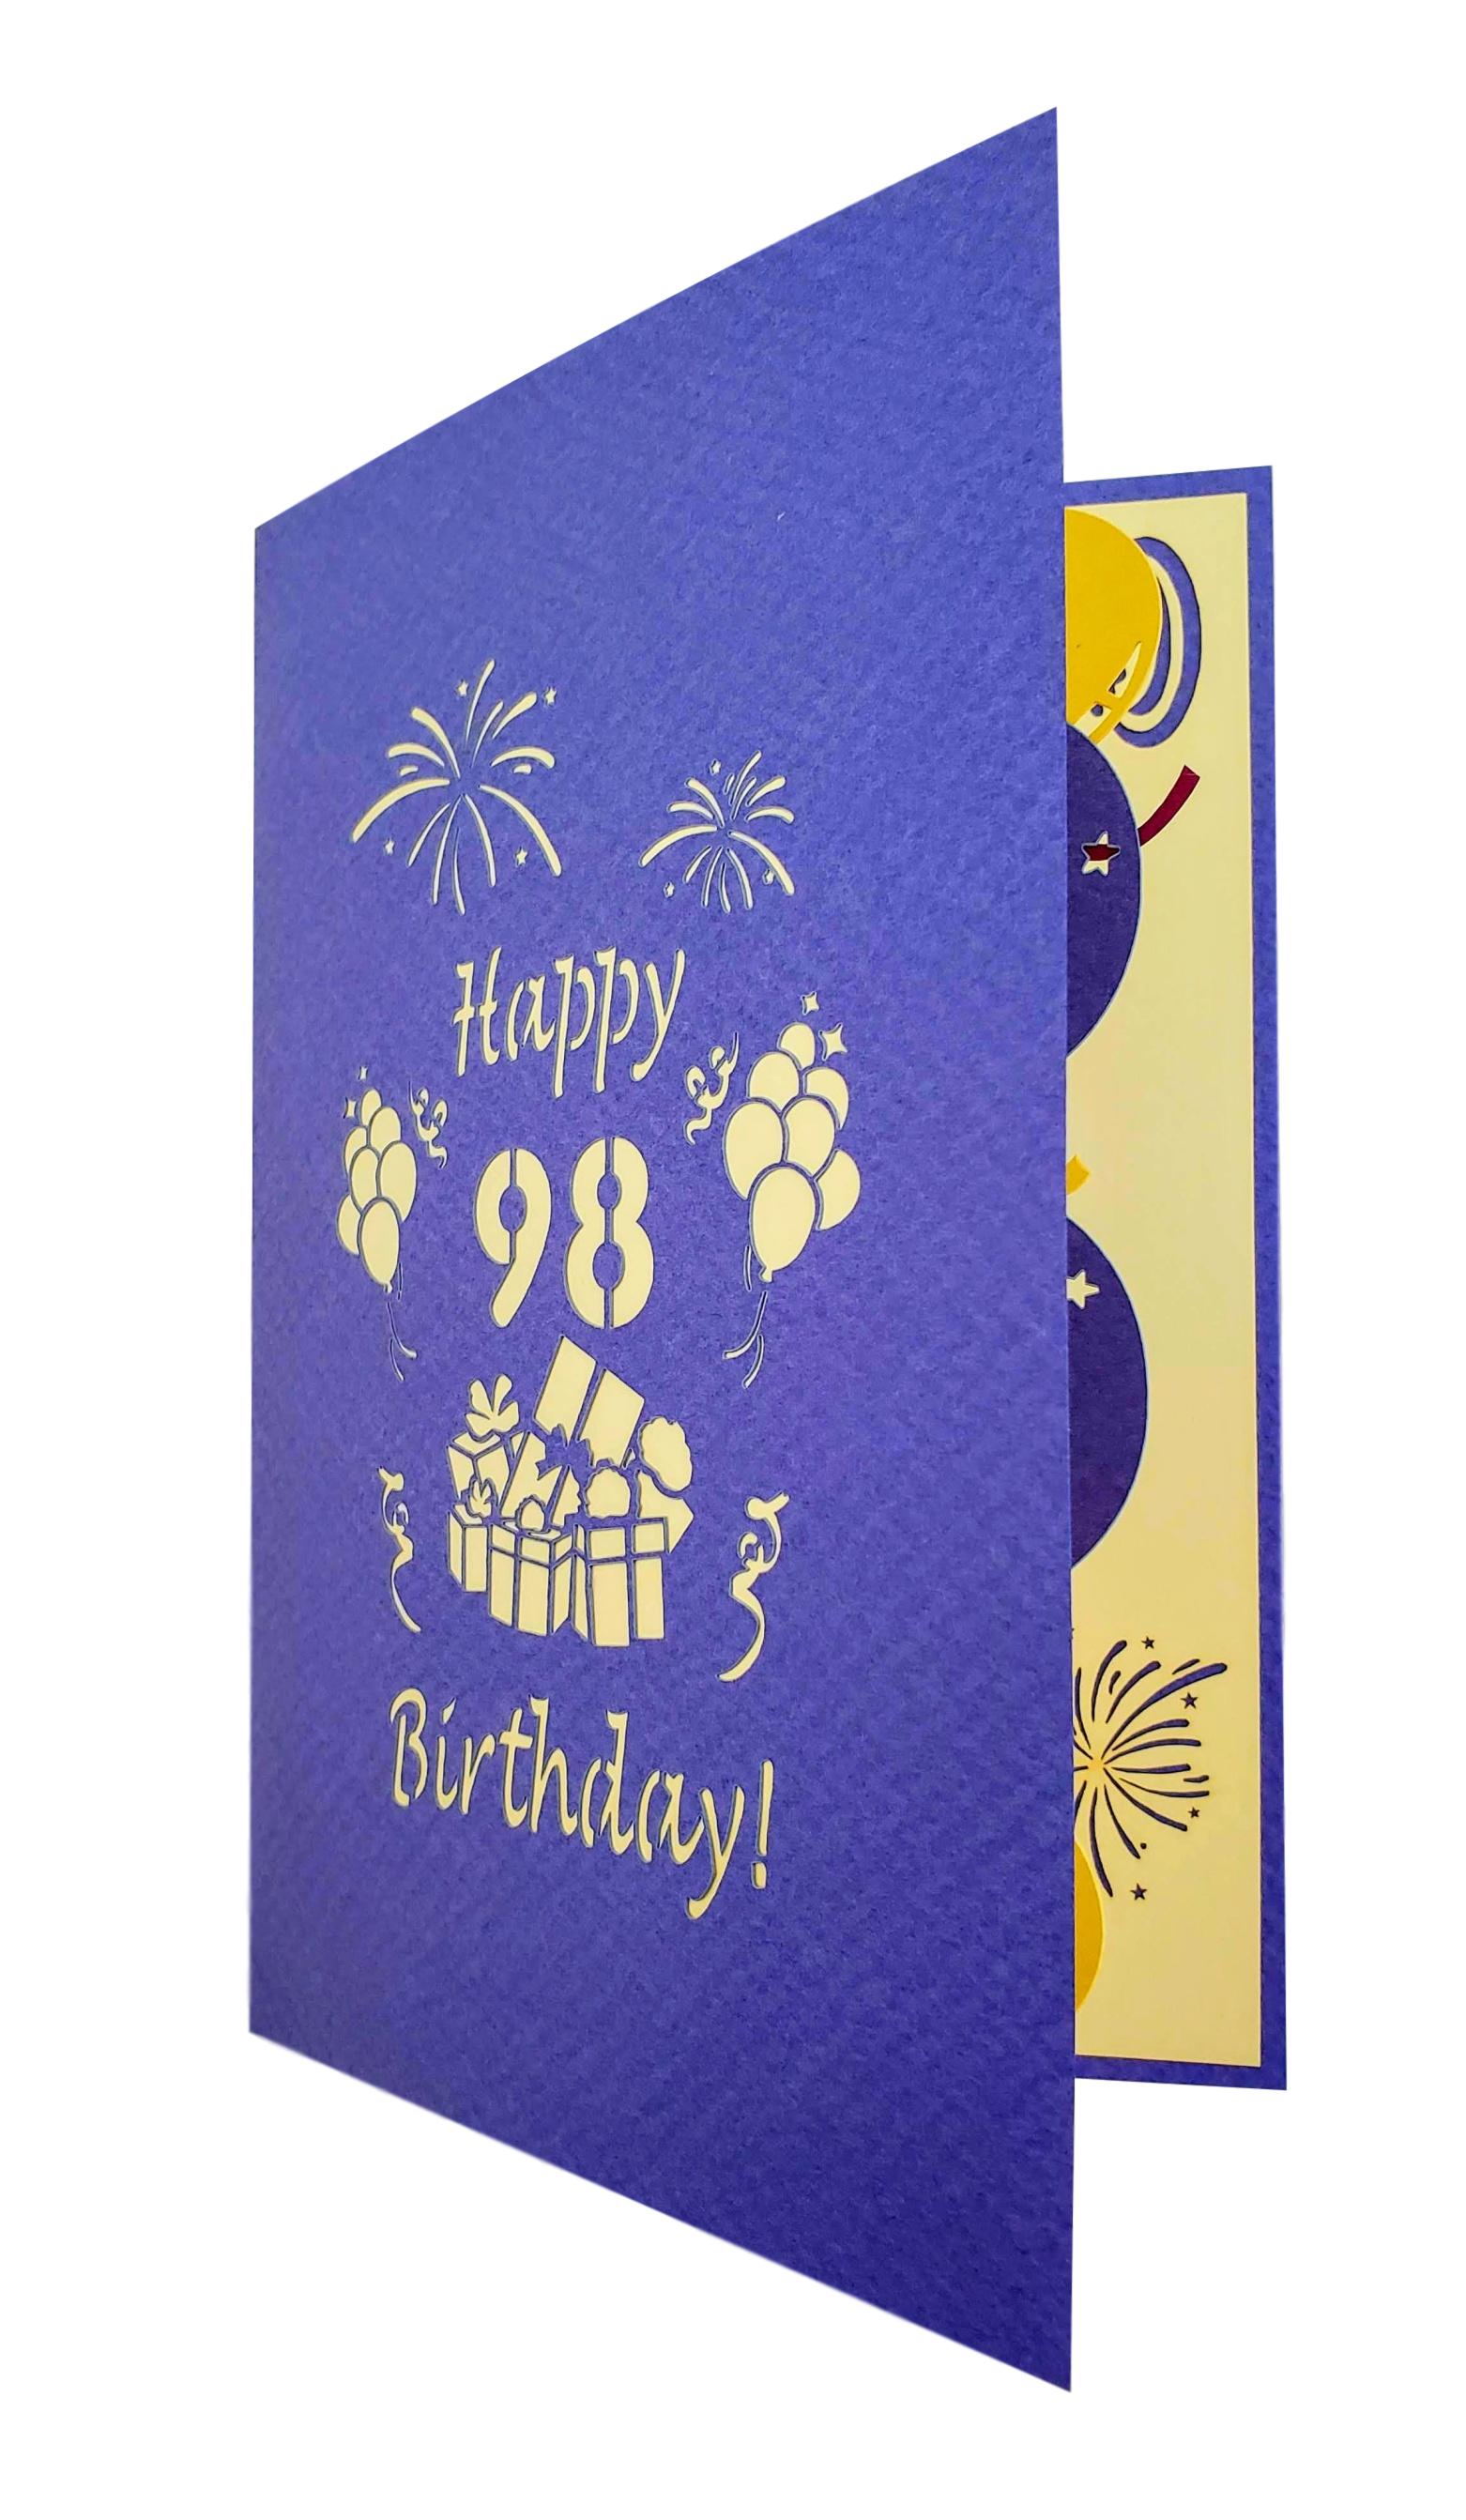 98th Birthday with Presents 3D Pop Up Greeting Card - Awesome - best wishes - Birthday - Celebration - iGifts And Cards